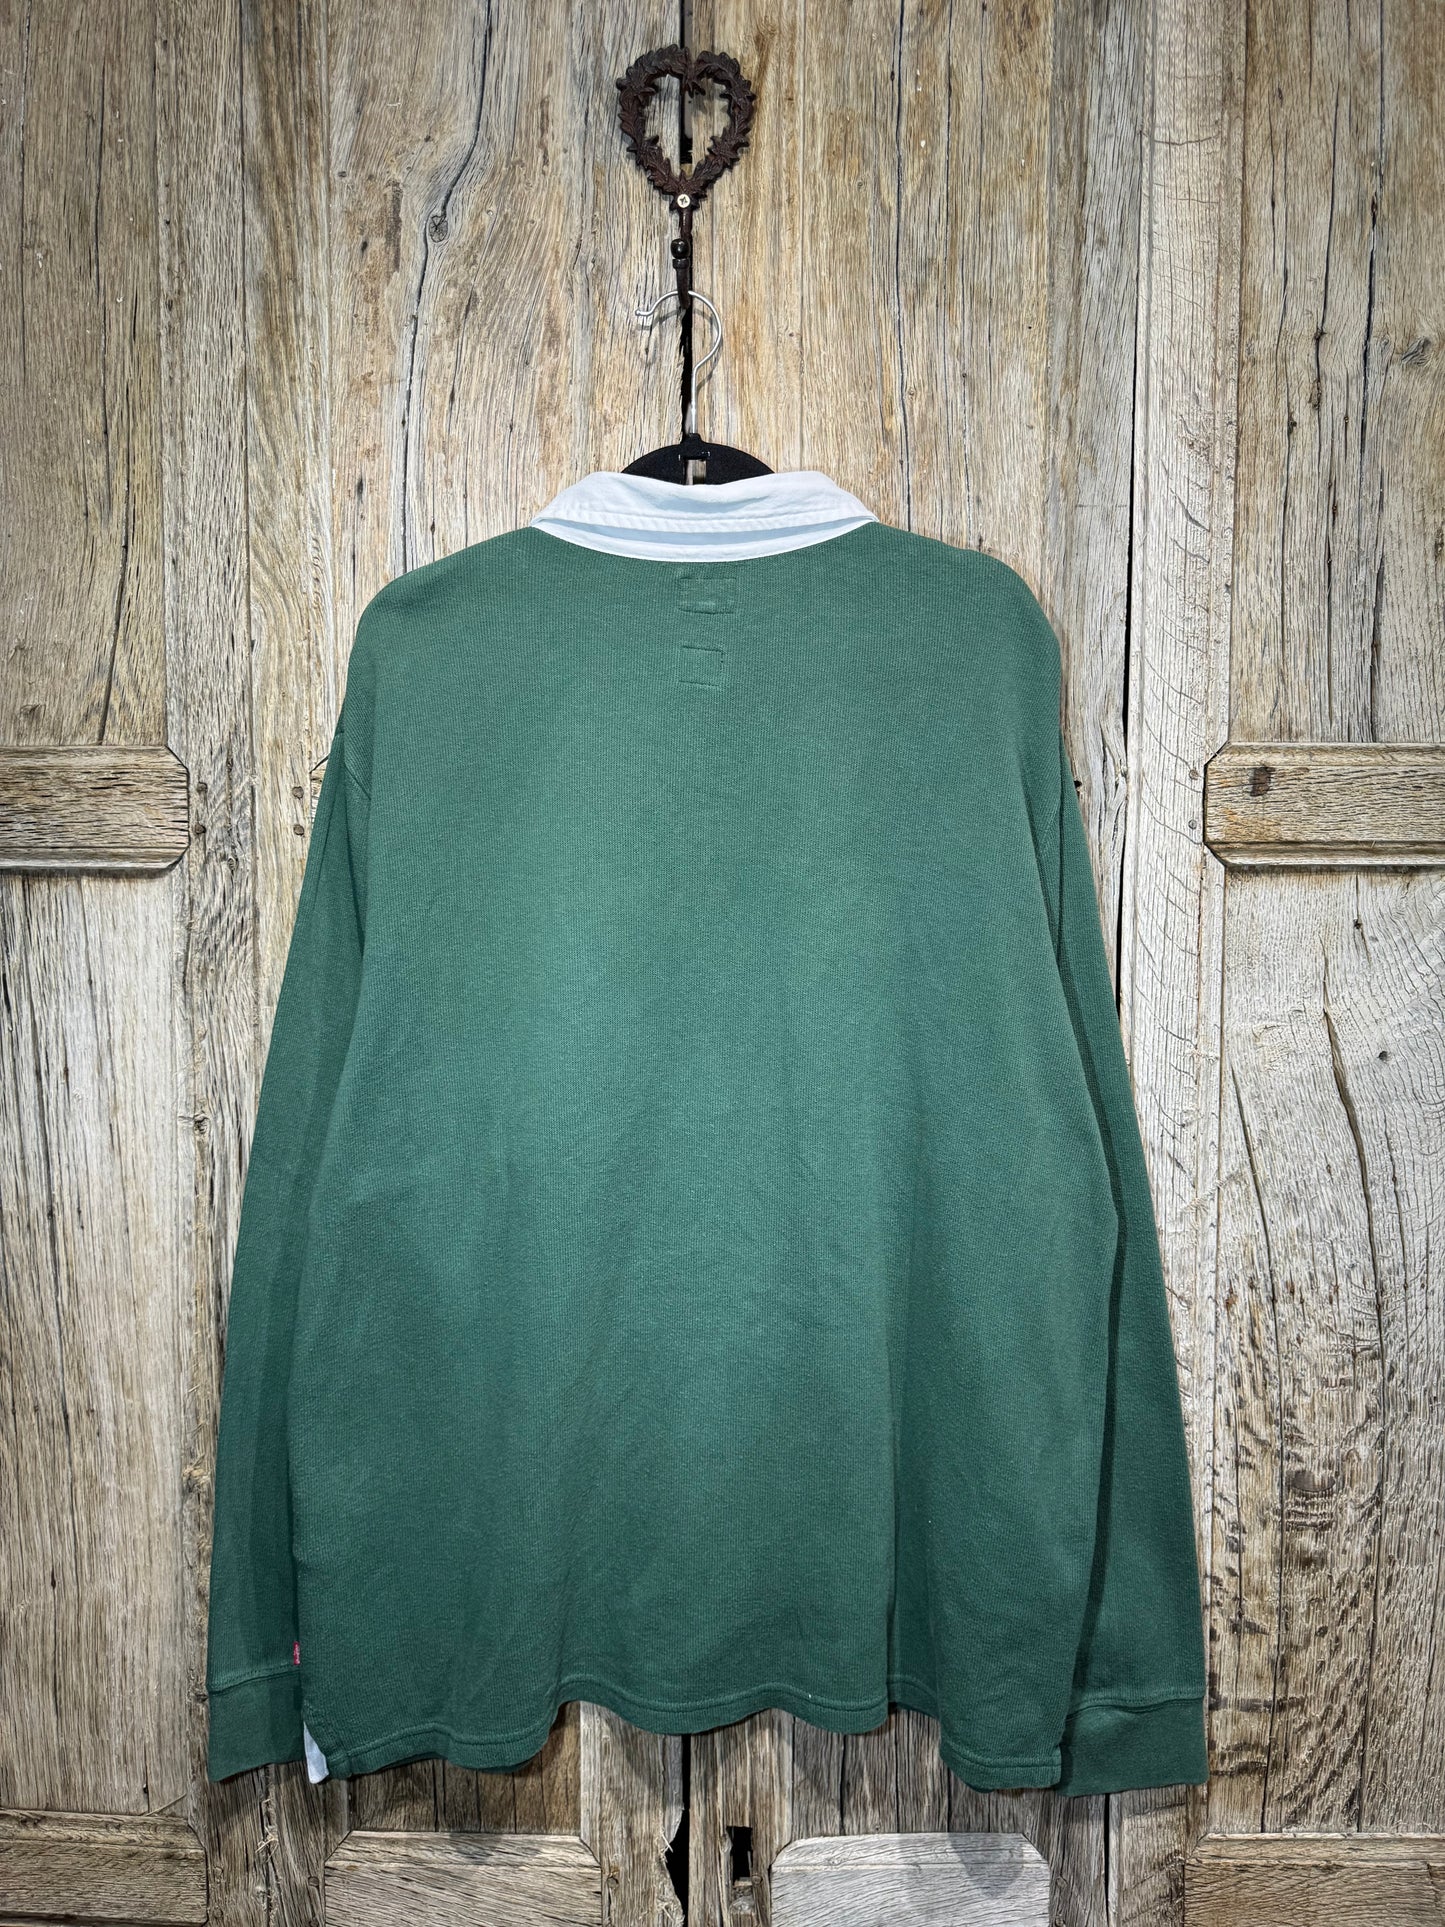 Levi’s Green Packers Rugby Shirt